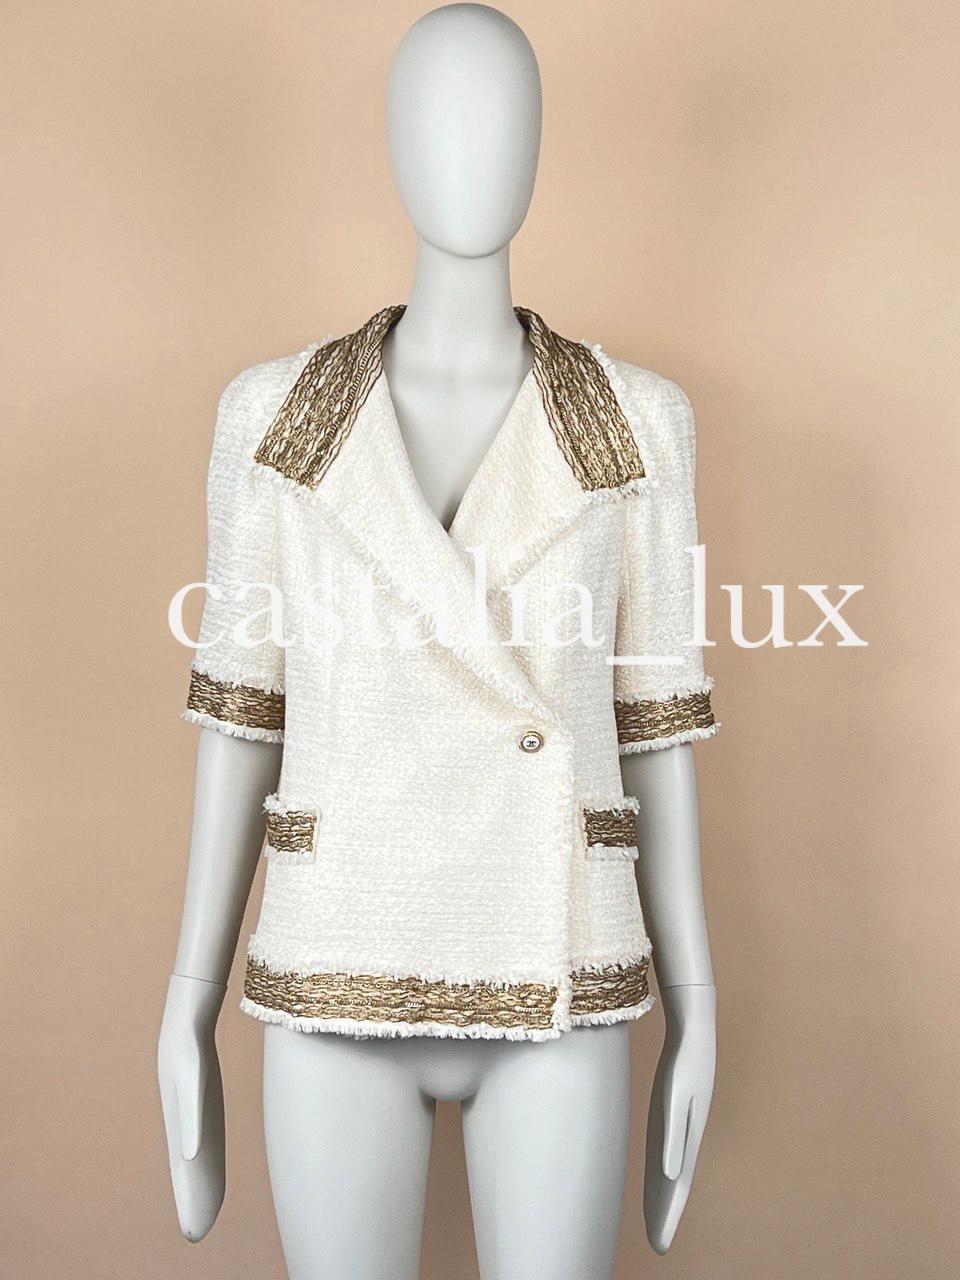 Chanel Extremely Rare Chain Accents Jacket from Ad Campaign For Sale 4